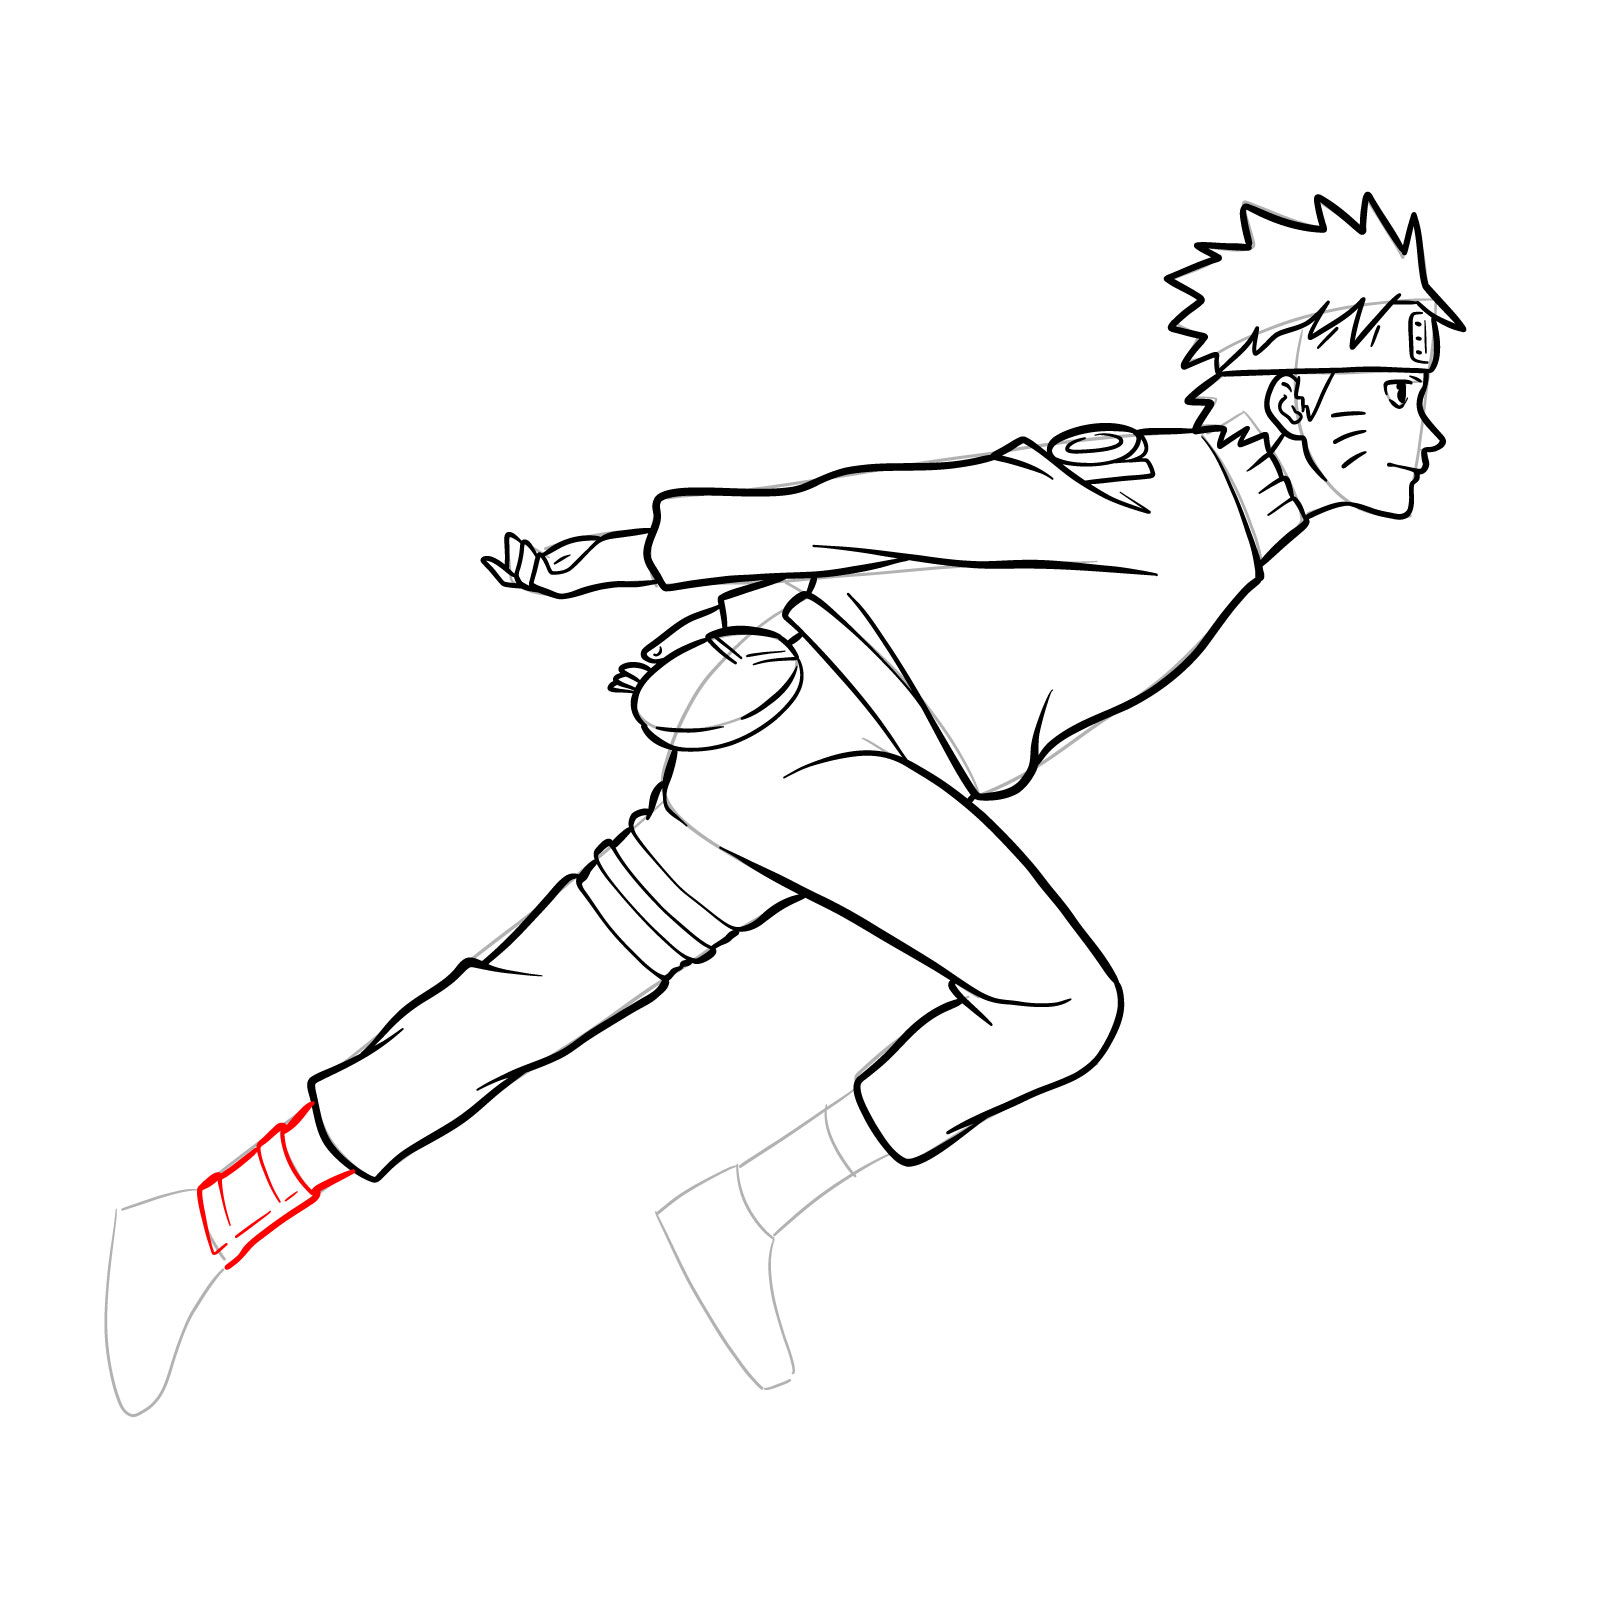 How to draw Naruto running - step 32